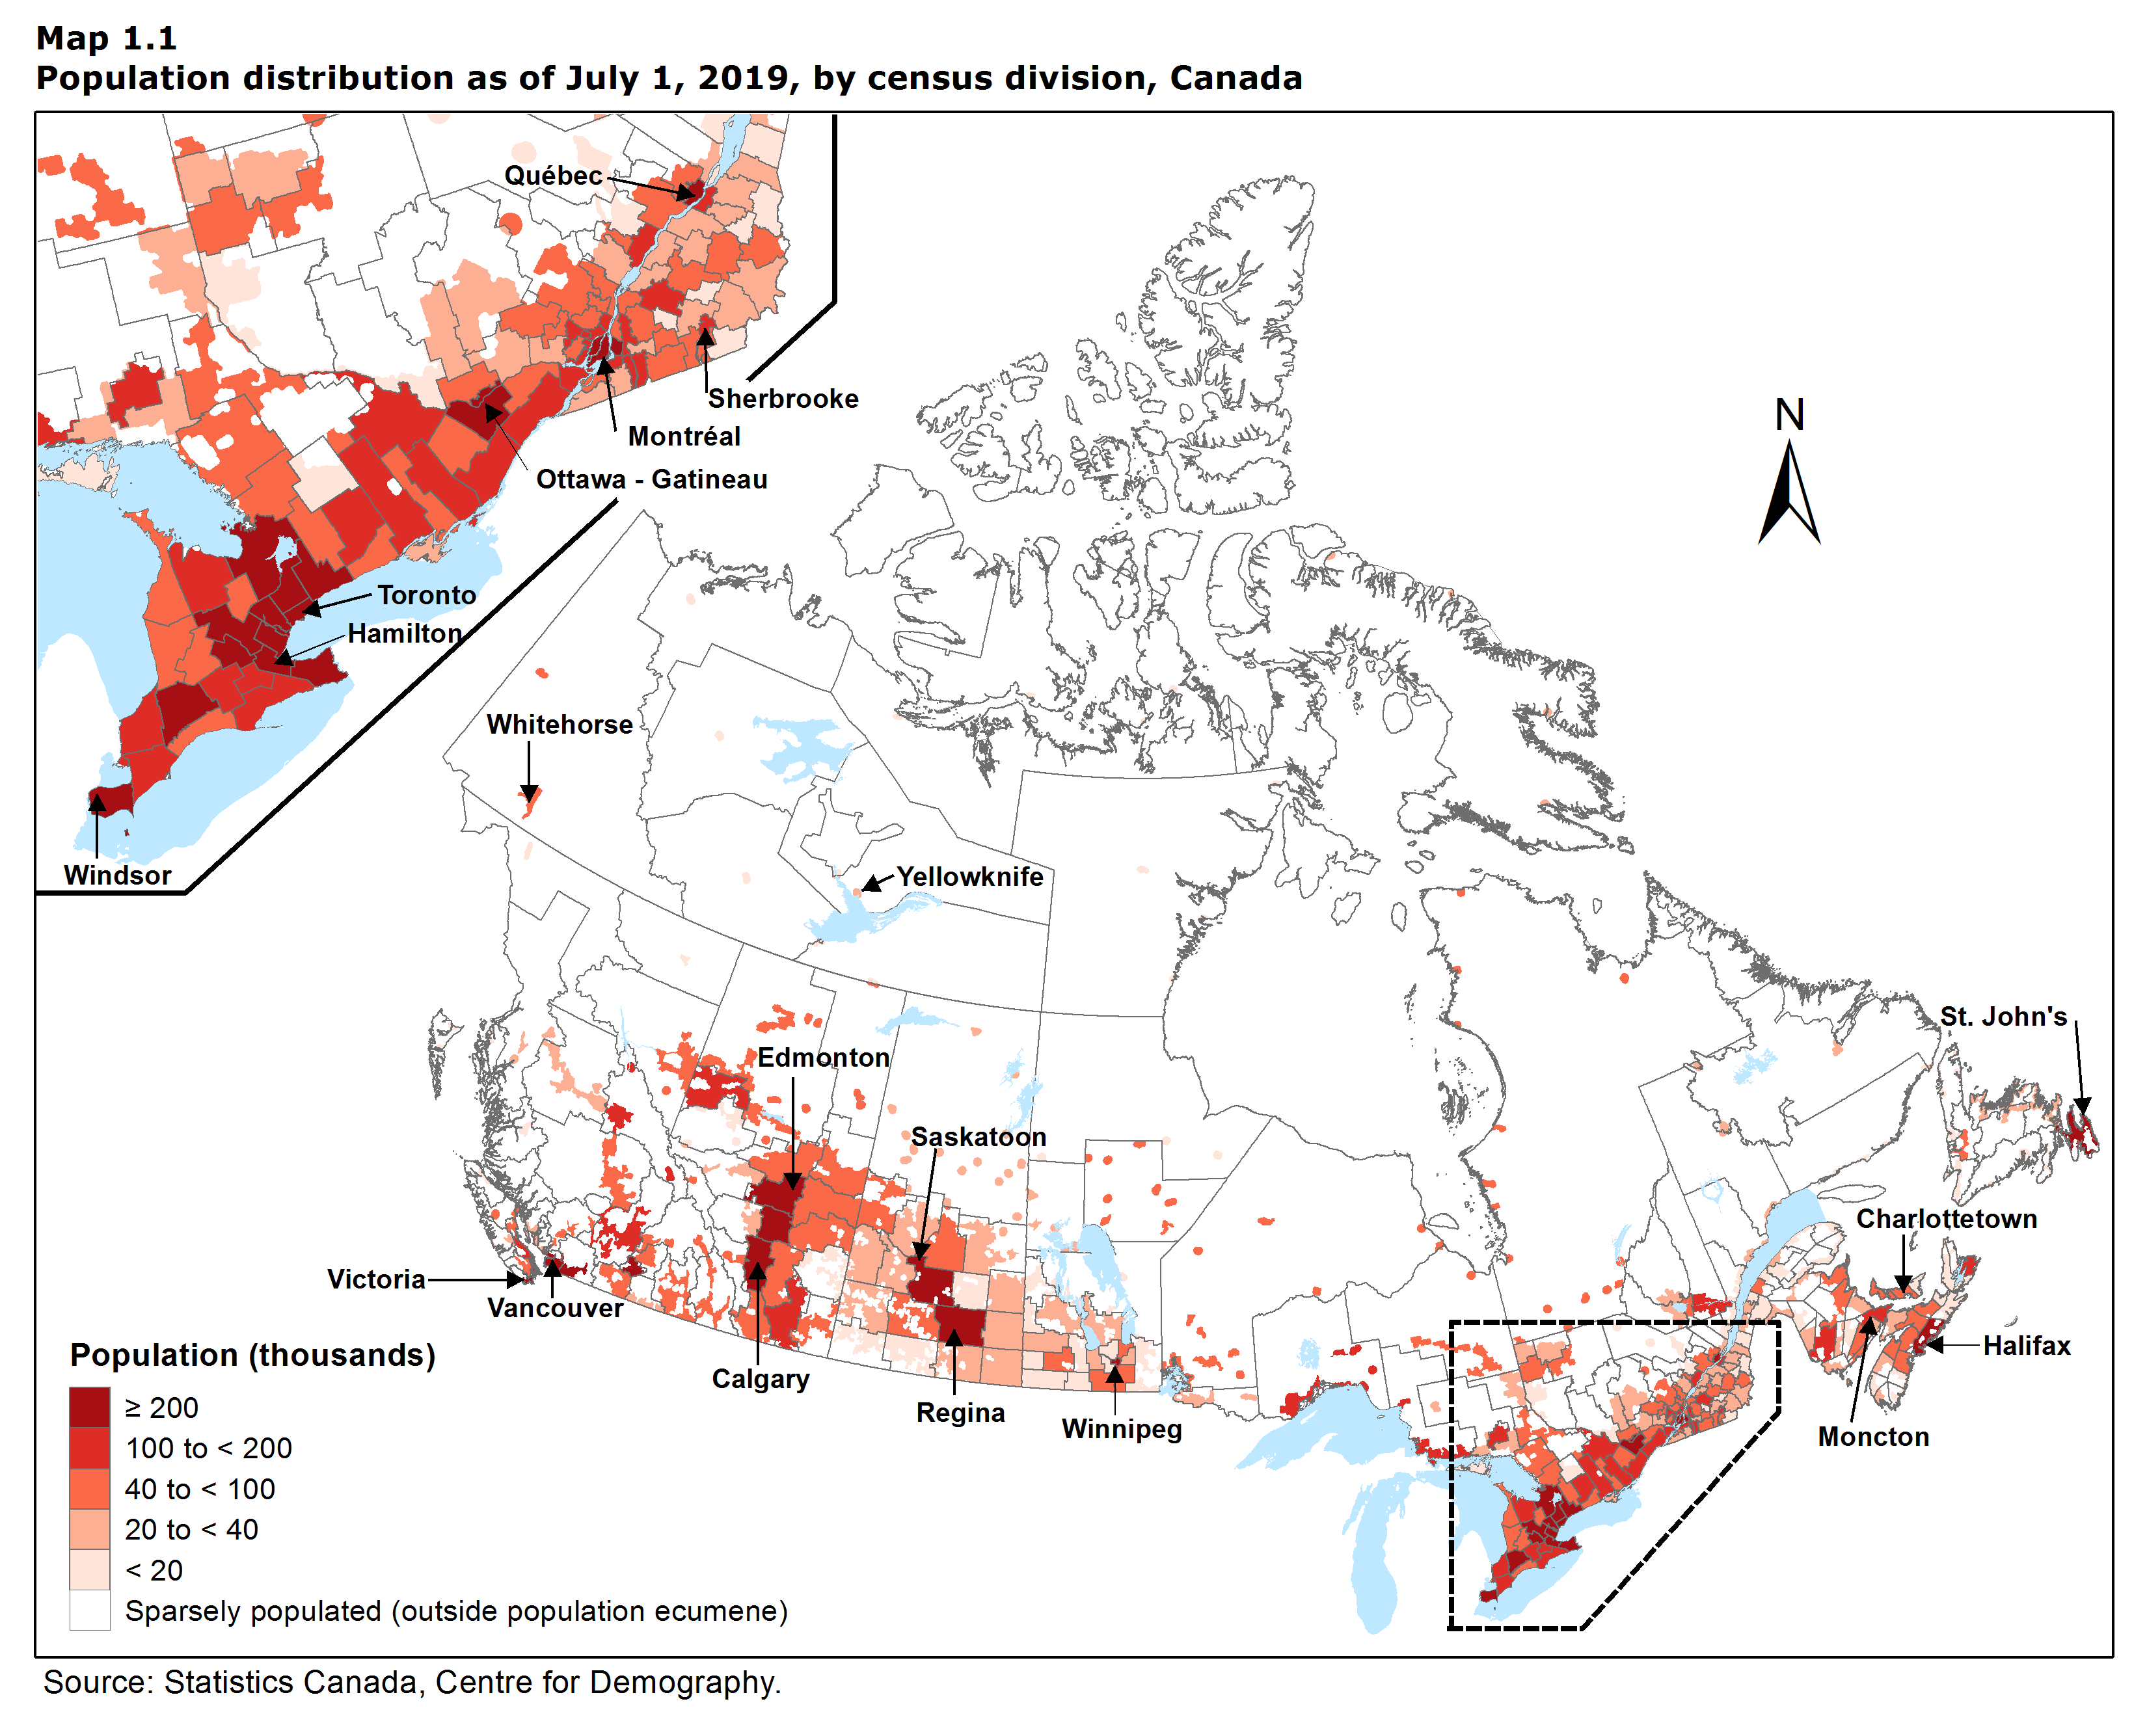 Map 1.1 Population distribution as of July 1, 2019, by census division, Canada 